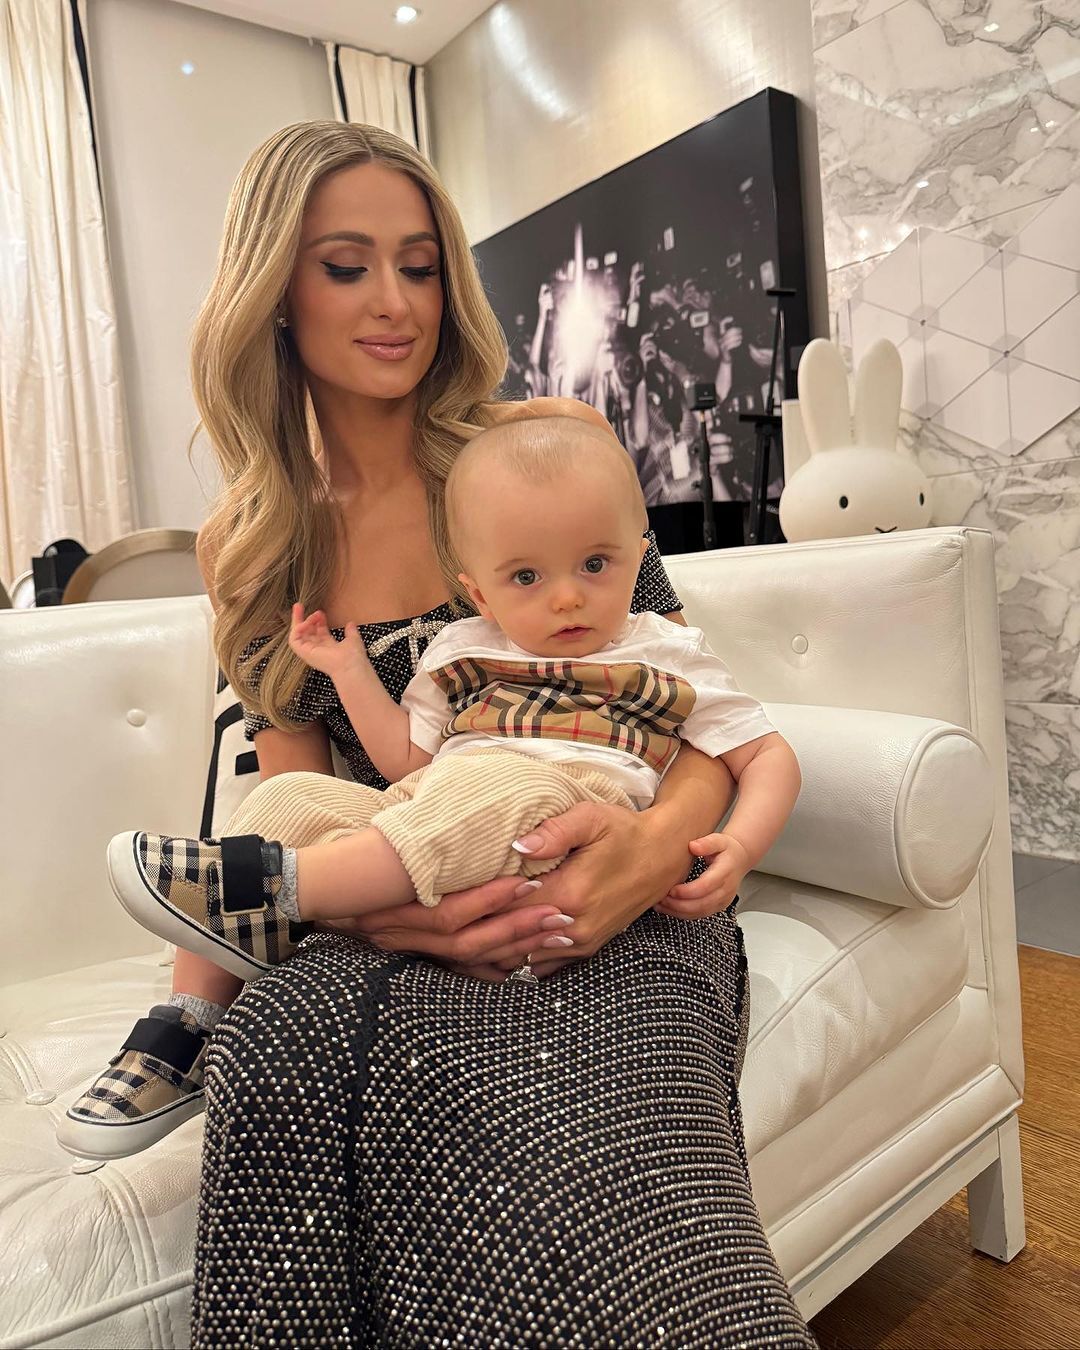 Paris Hilton showed new photos of her son - fans advised her to see a ...